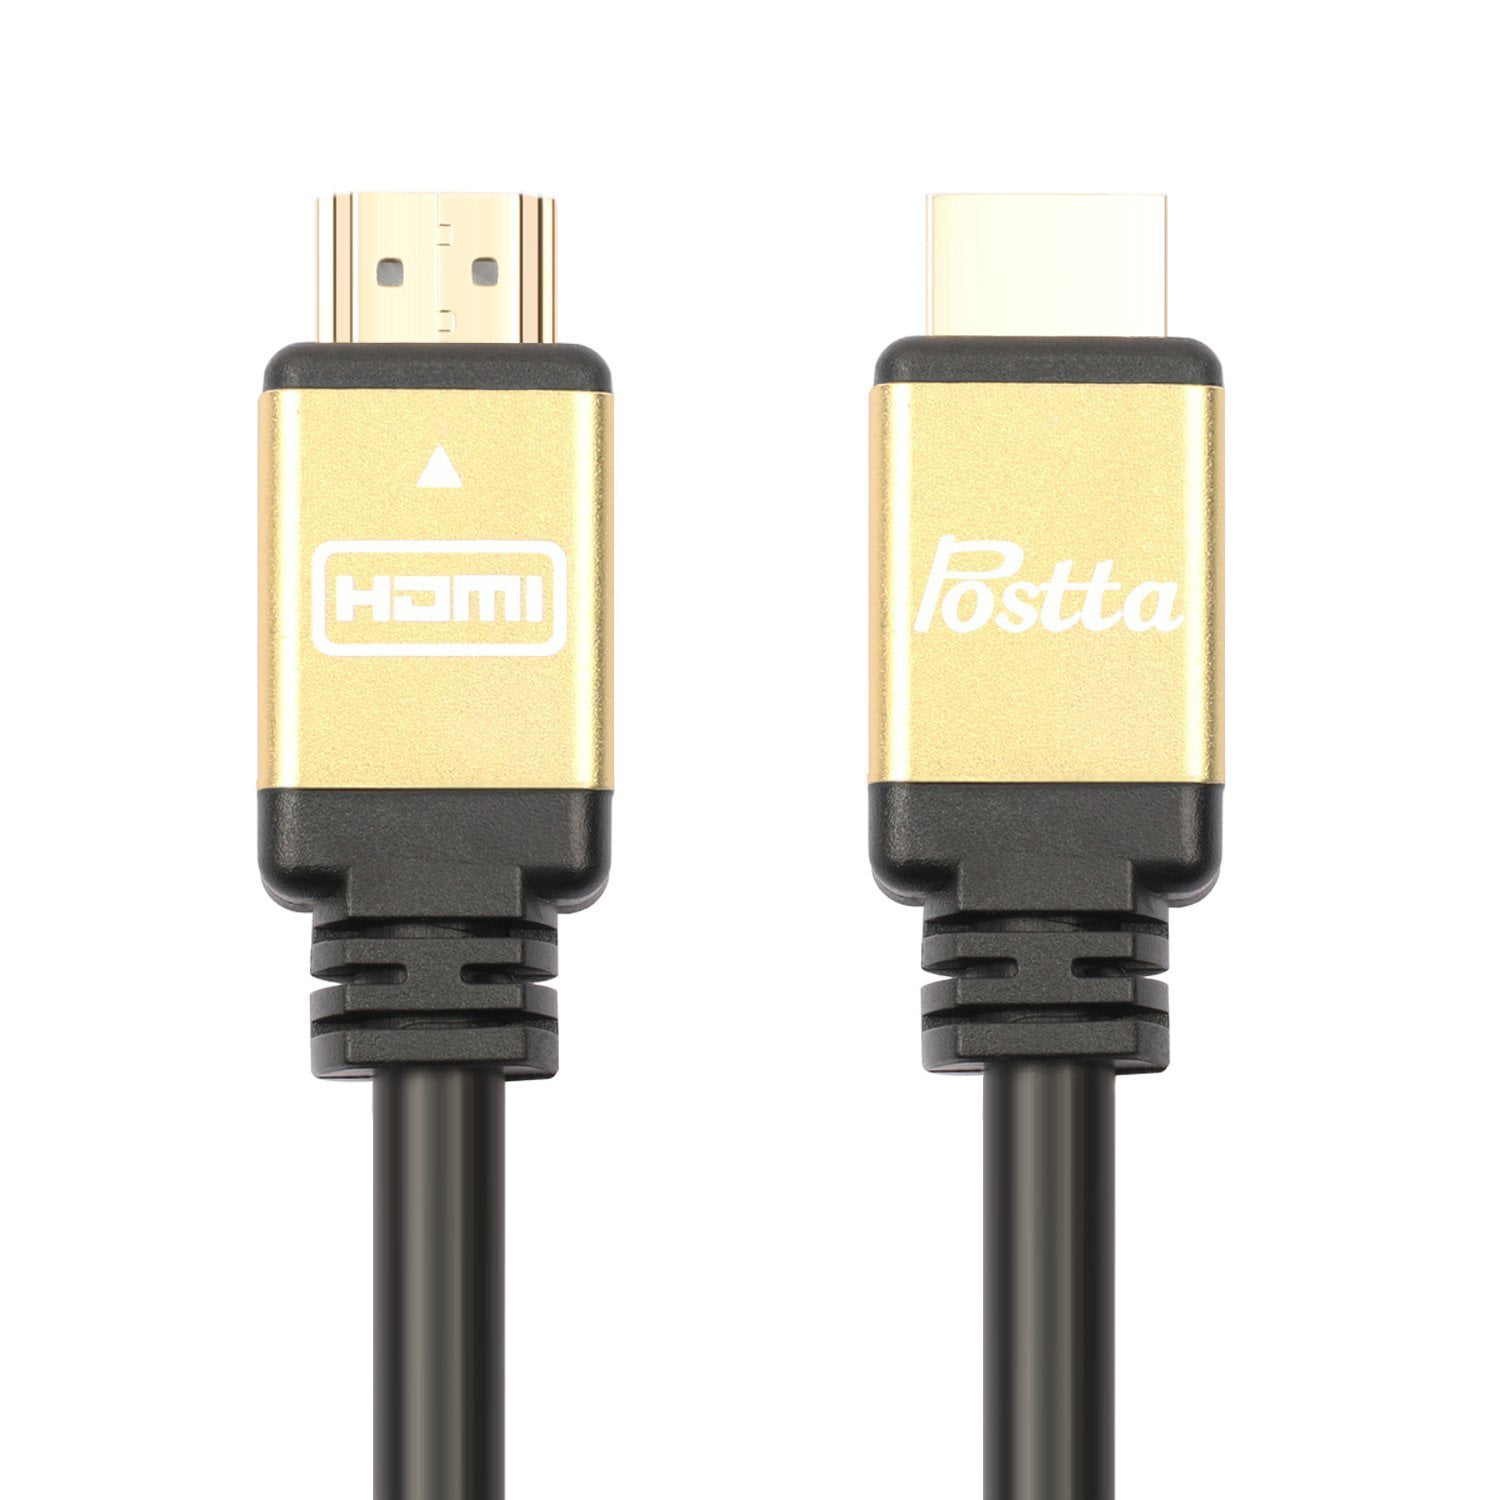 Ultra HDMI 2.0V Cable with 2 Piece Cable Ties+2 Piece HDMI Adapters Support 4K 2160P,1080P,3D,Audio Return and Ethernet Postta HDMI Cable 20 Feet